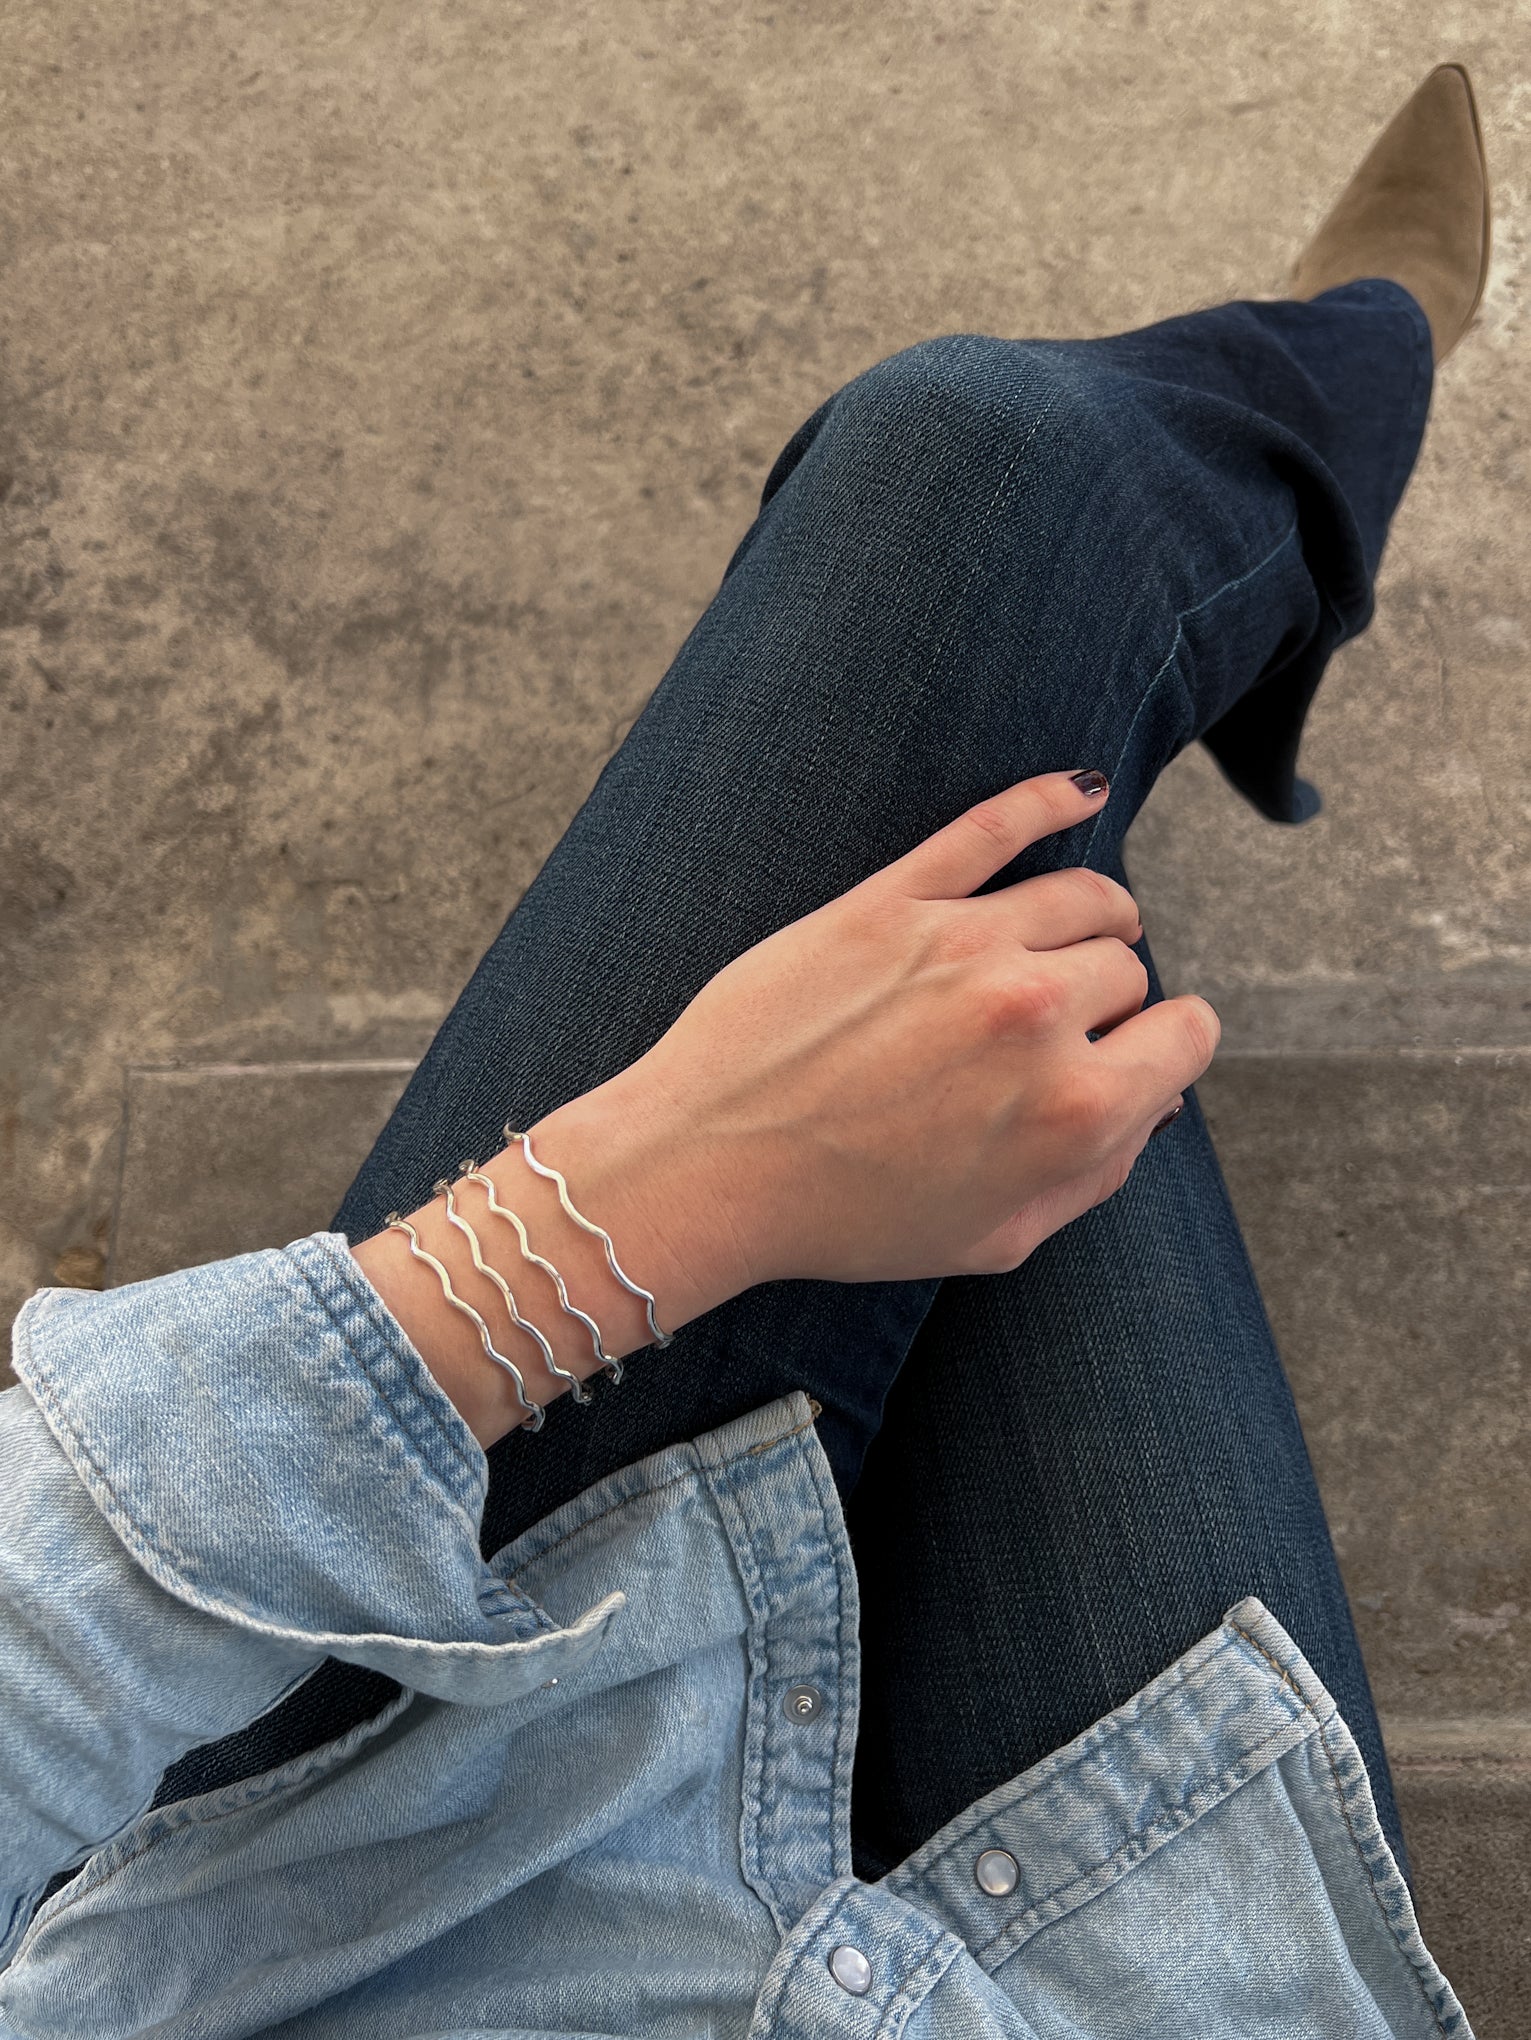 Lily Wujek wearing a stack of four Scallop Cuffs in Sterling Silver wearing blue jeans and a blue top